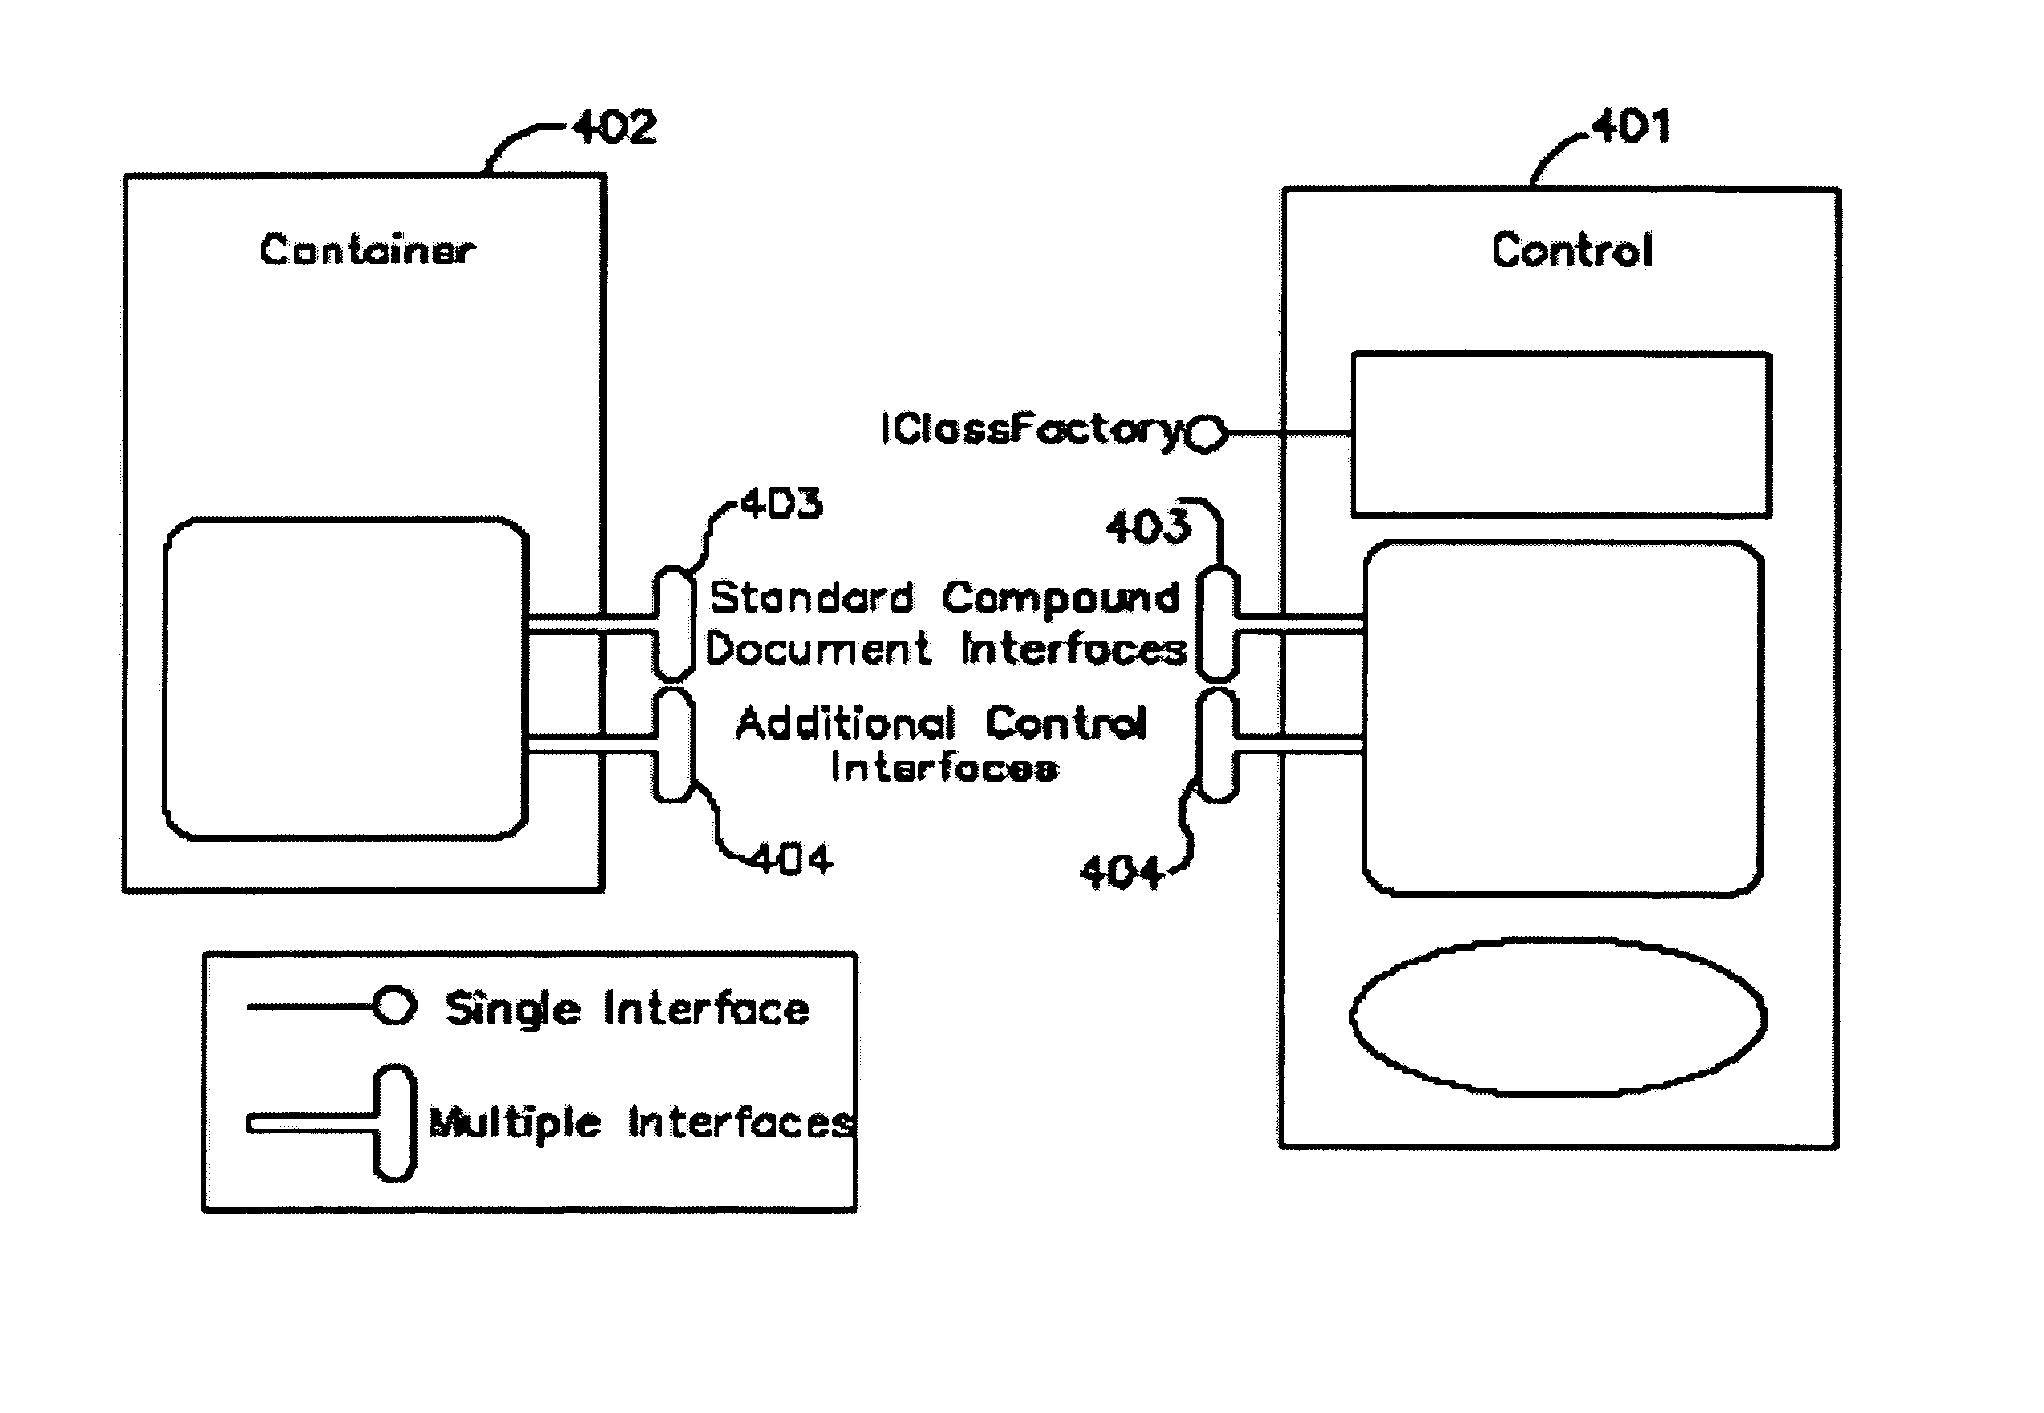 Method and system for remote browsing of computer files using a bar code reader